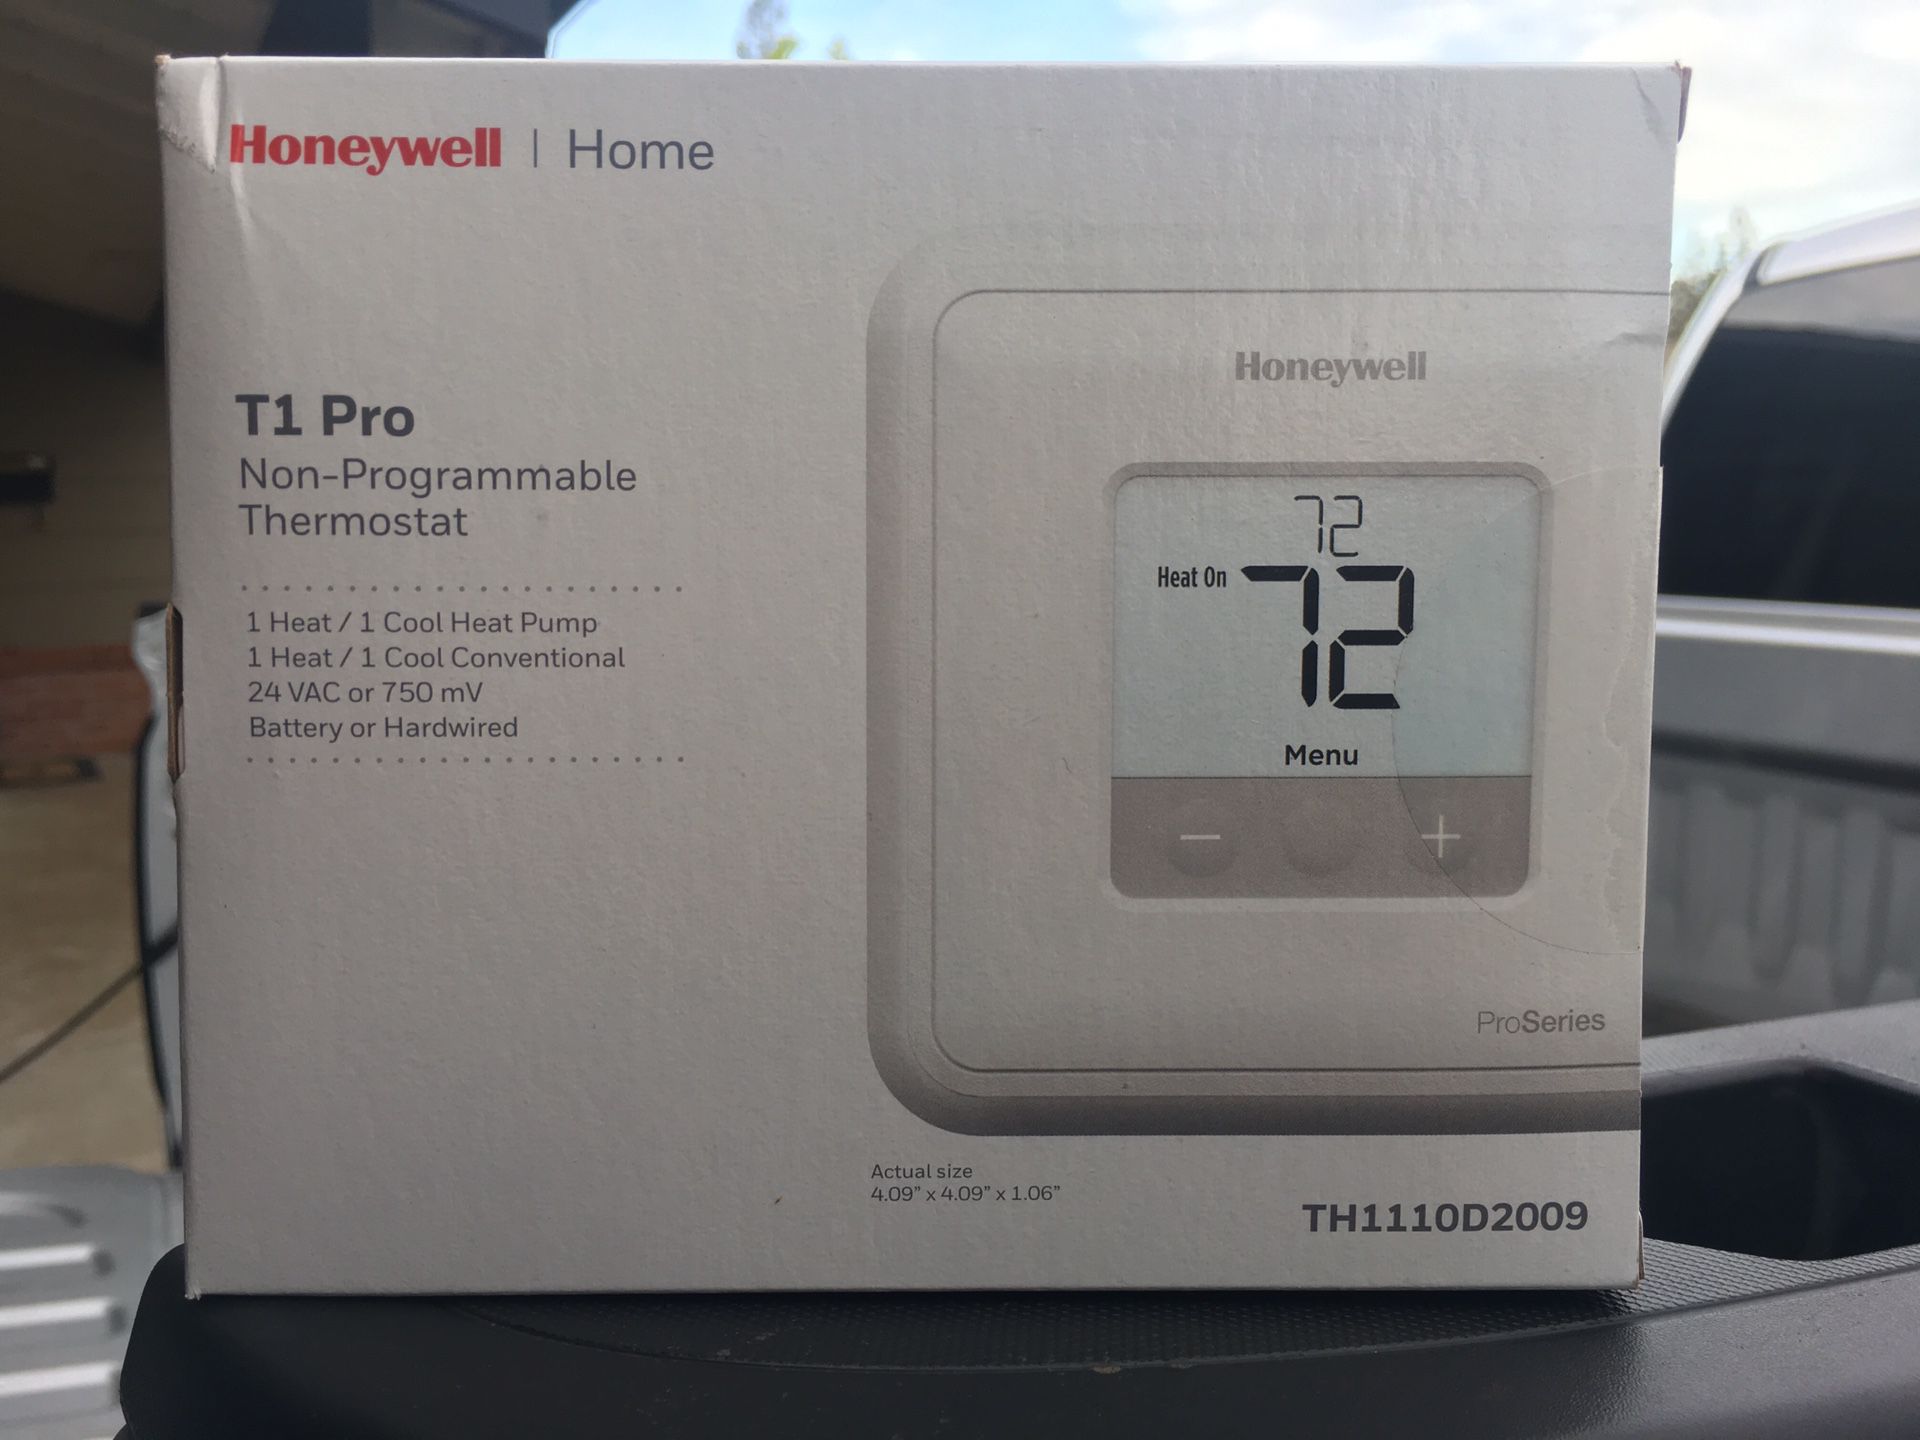 Honey well T1 pro thermostat